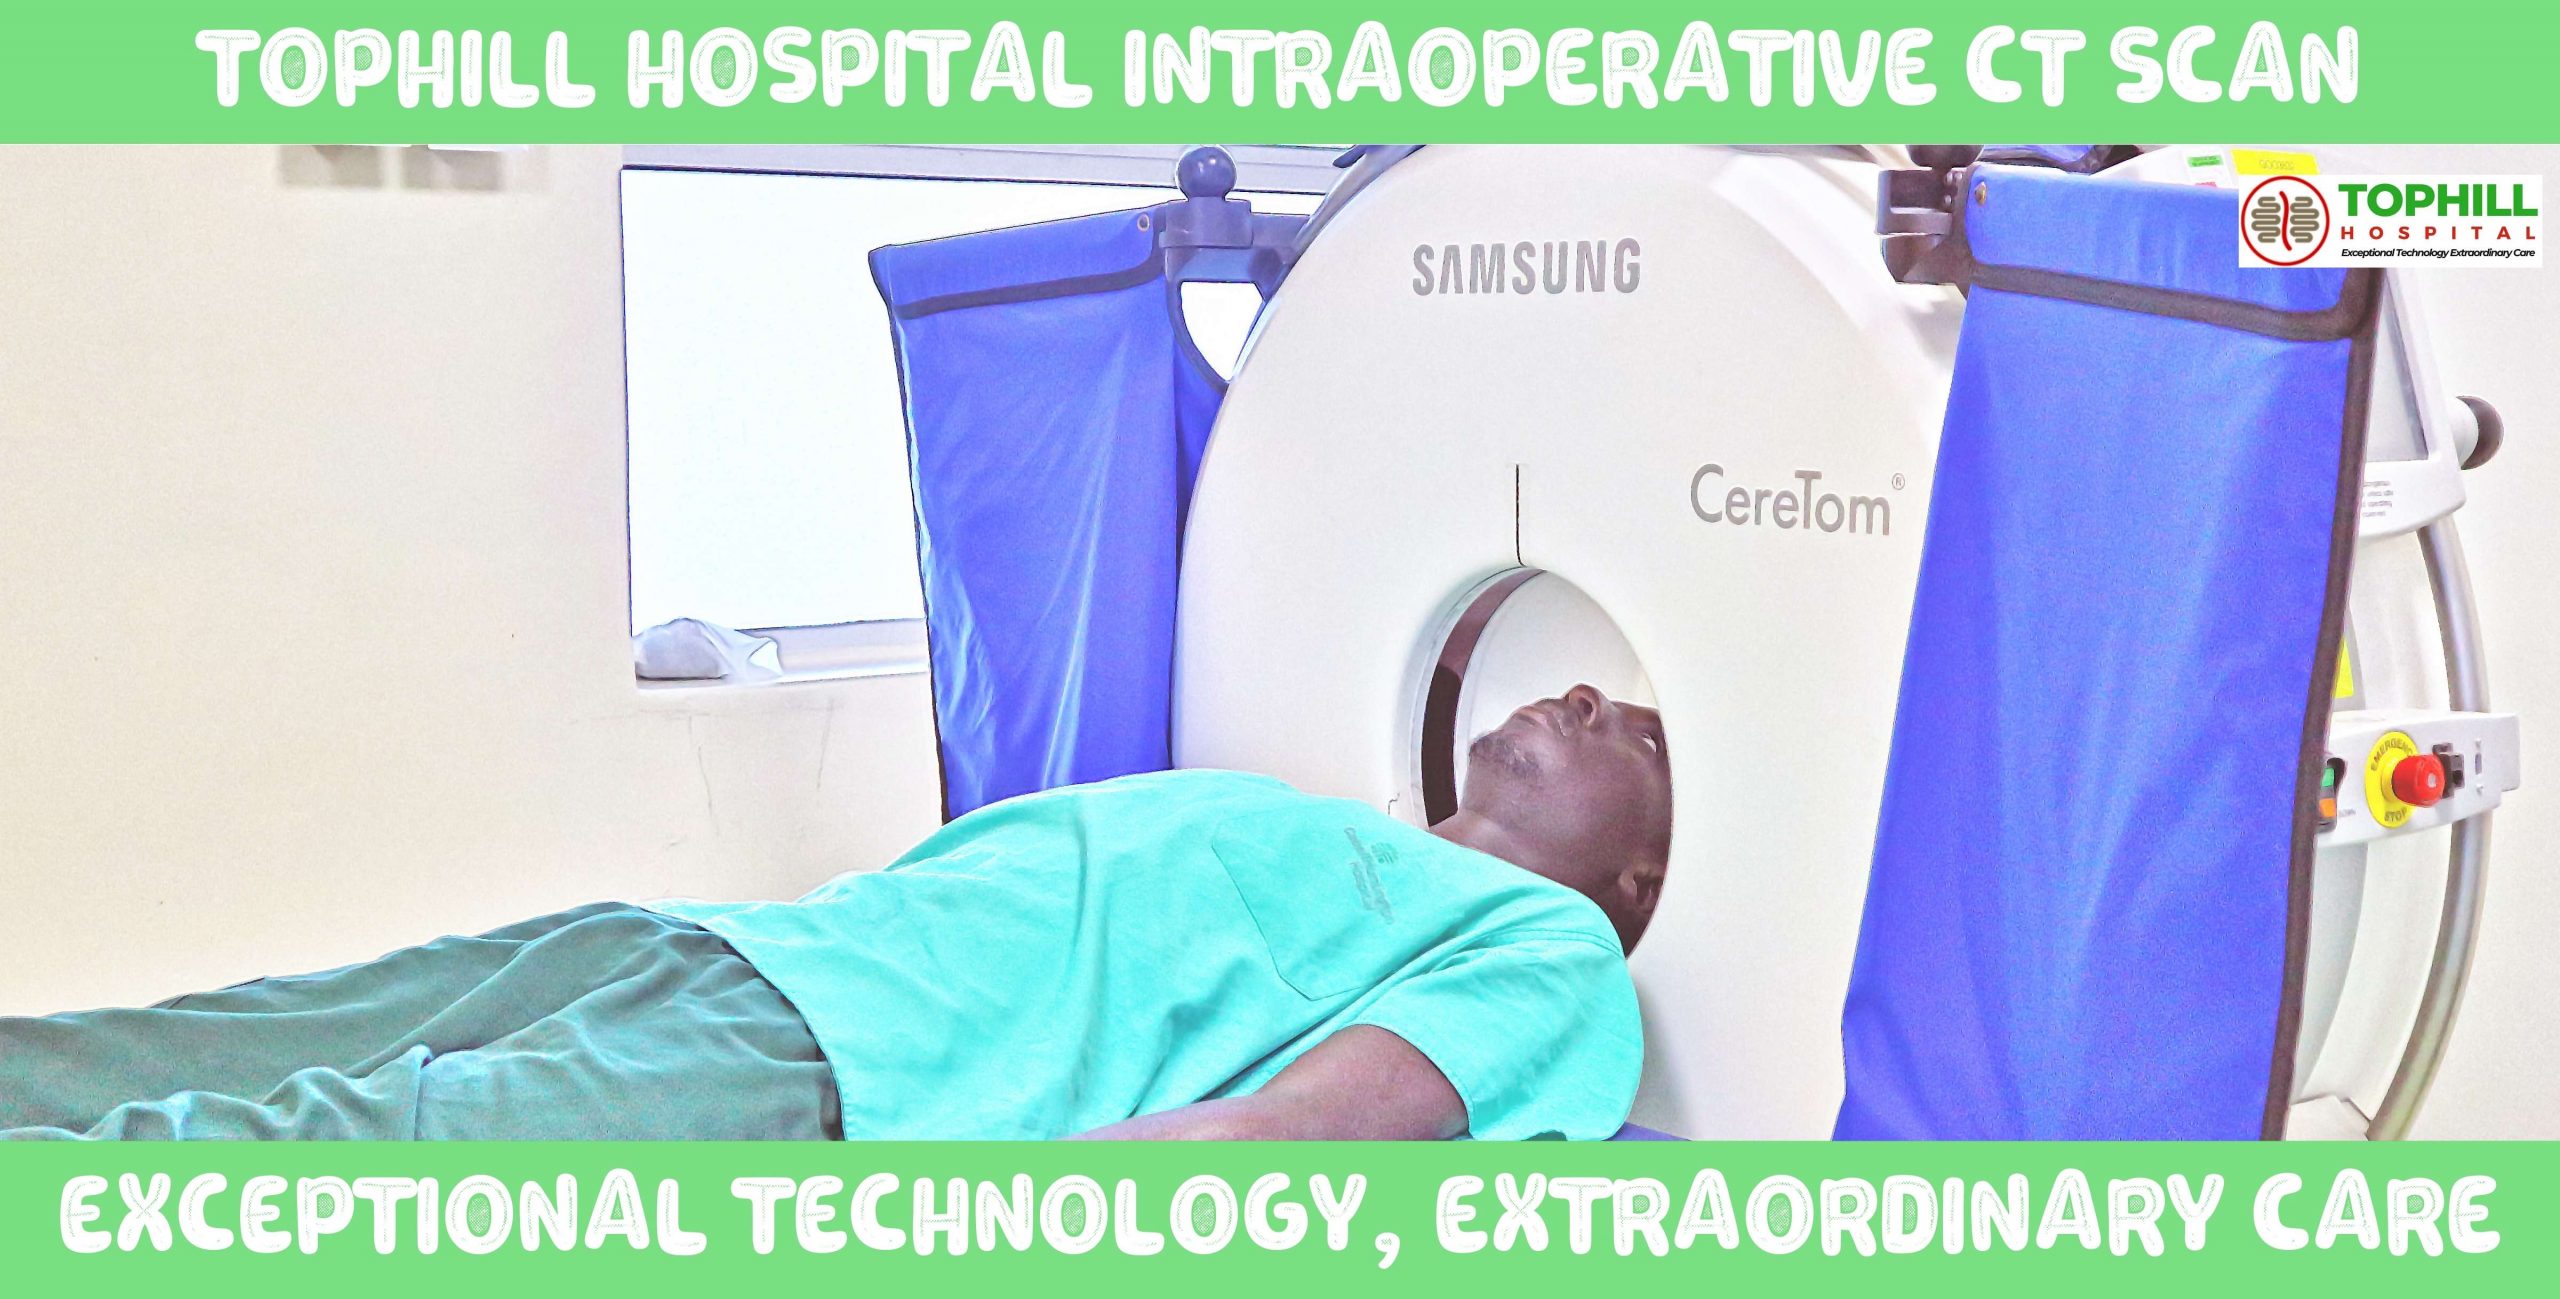 Tophill Hospital 8 Slice Intraoperative CT Scanner